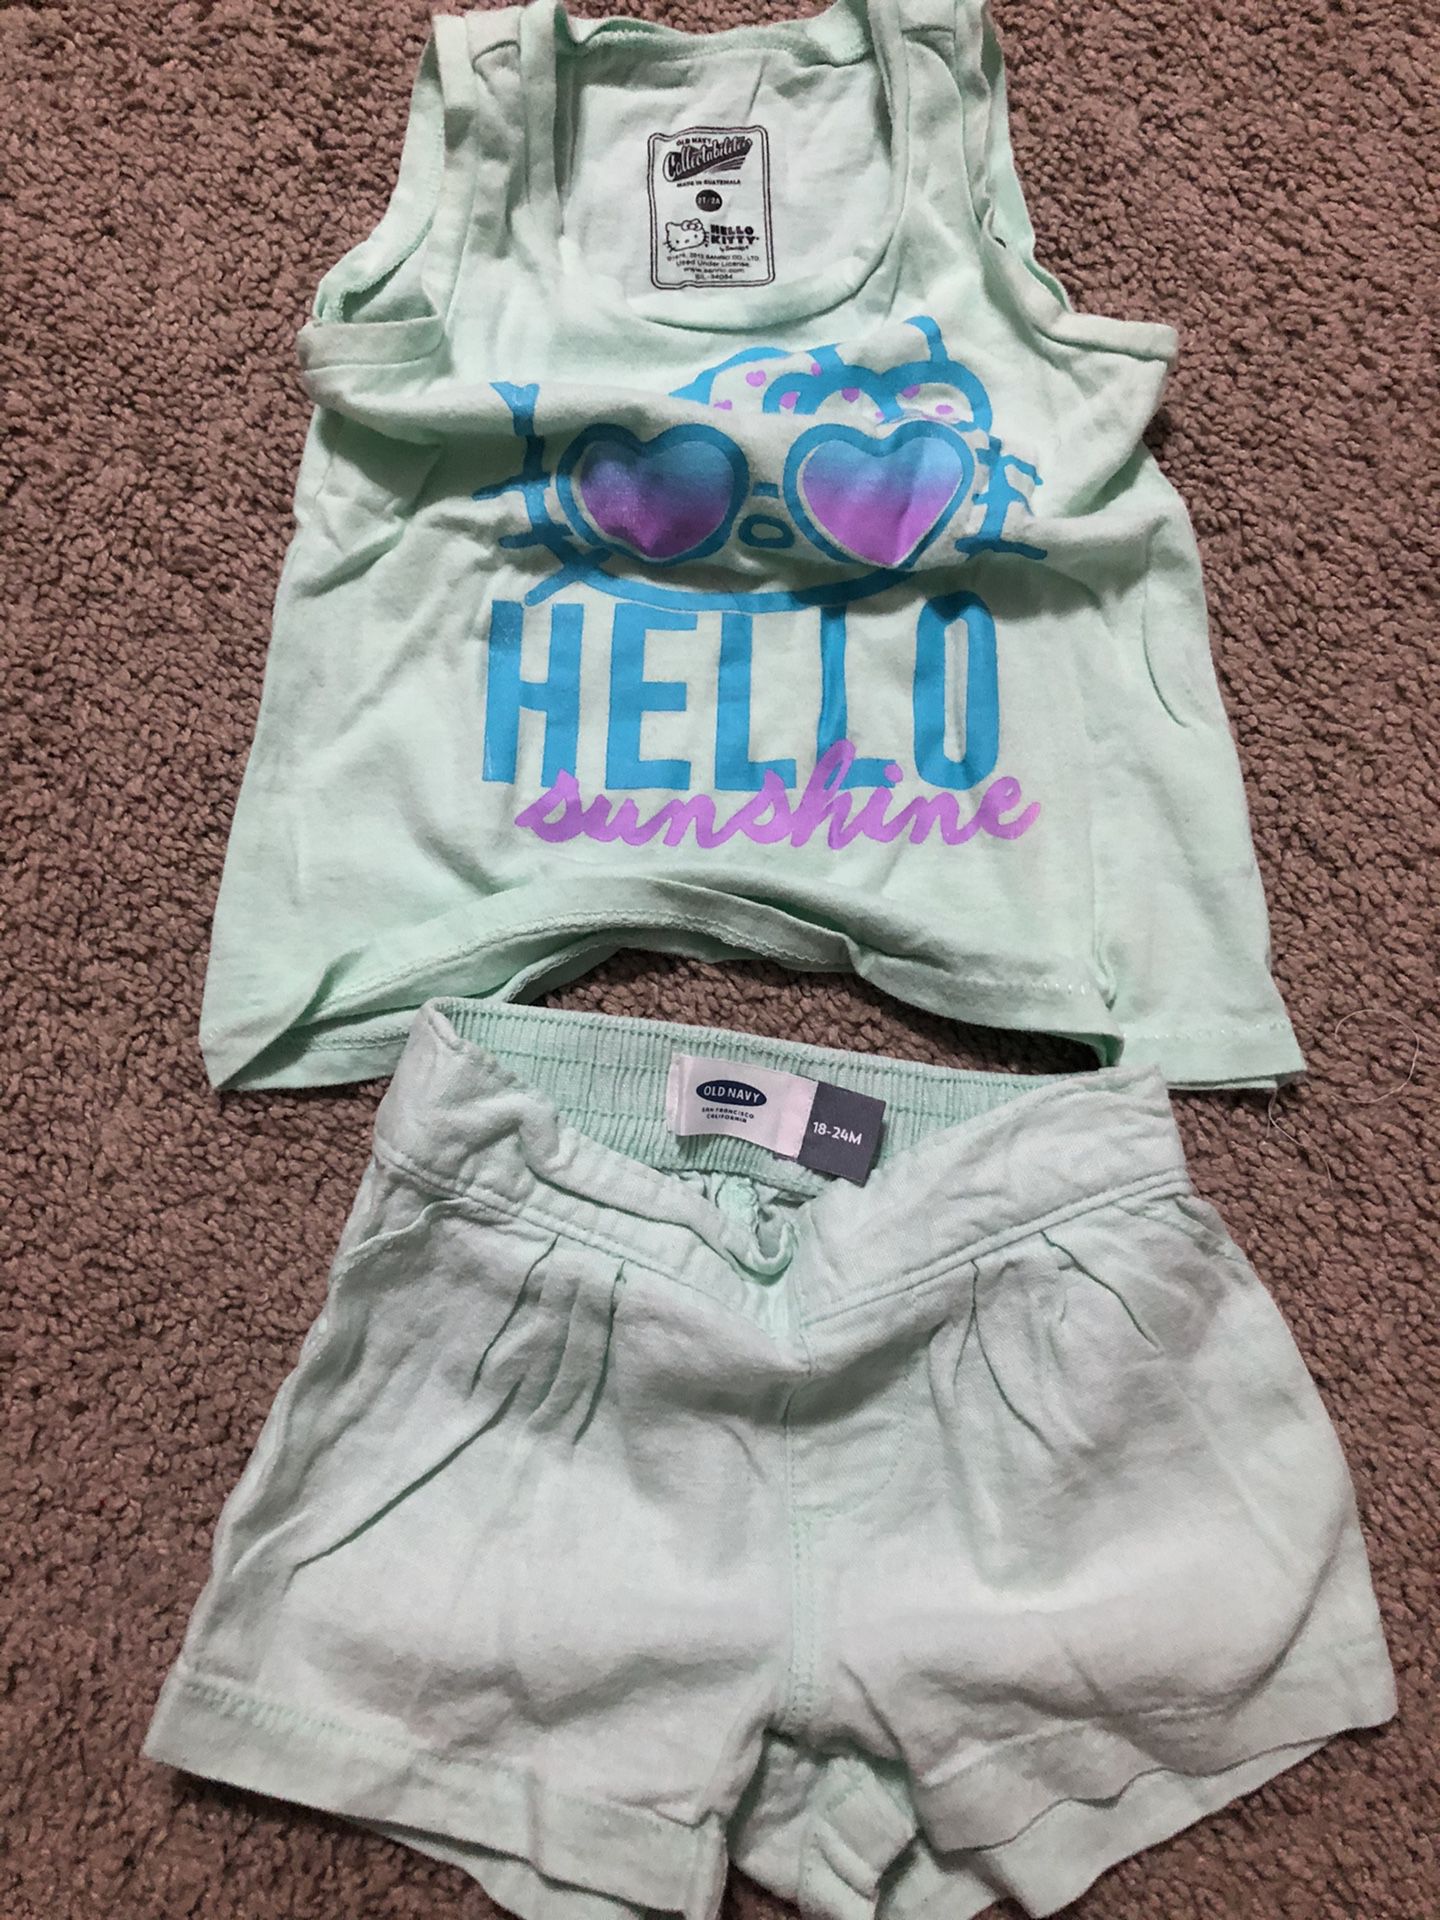 Old navy outfit for girls $5